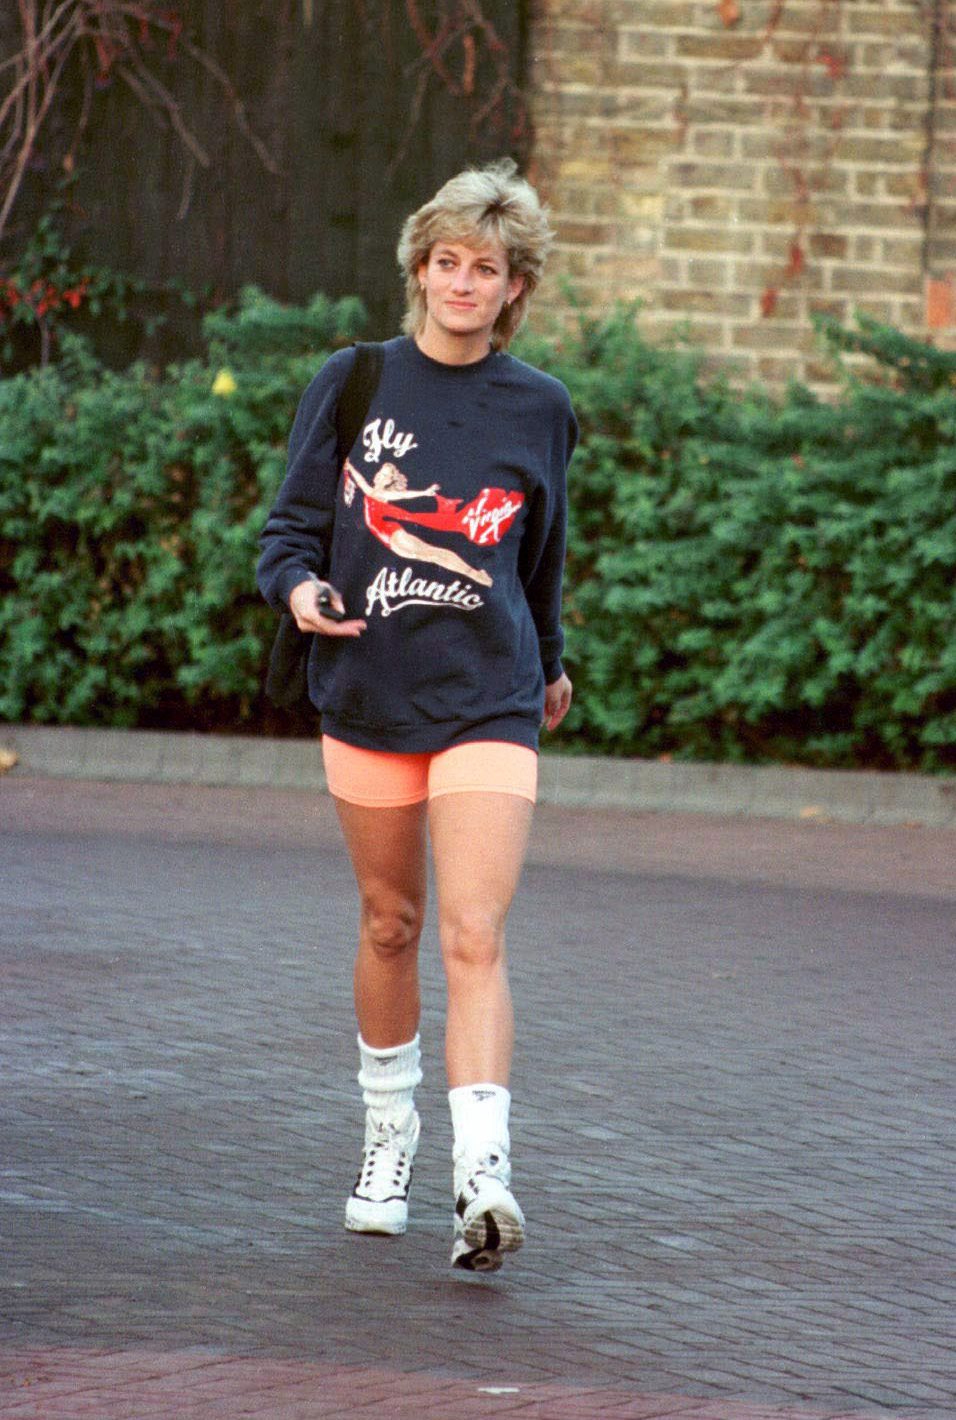 Straight Diana in trainers, bike shorts and a virgin Atlantic jumper